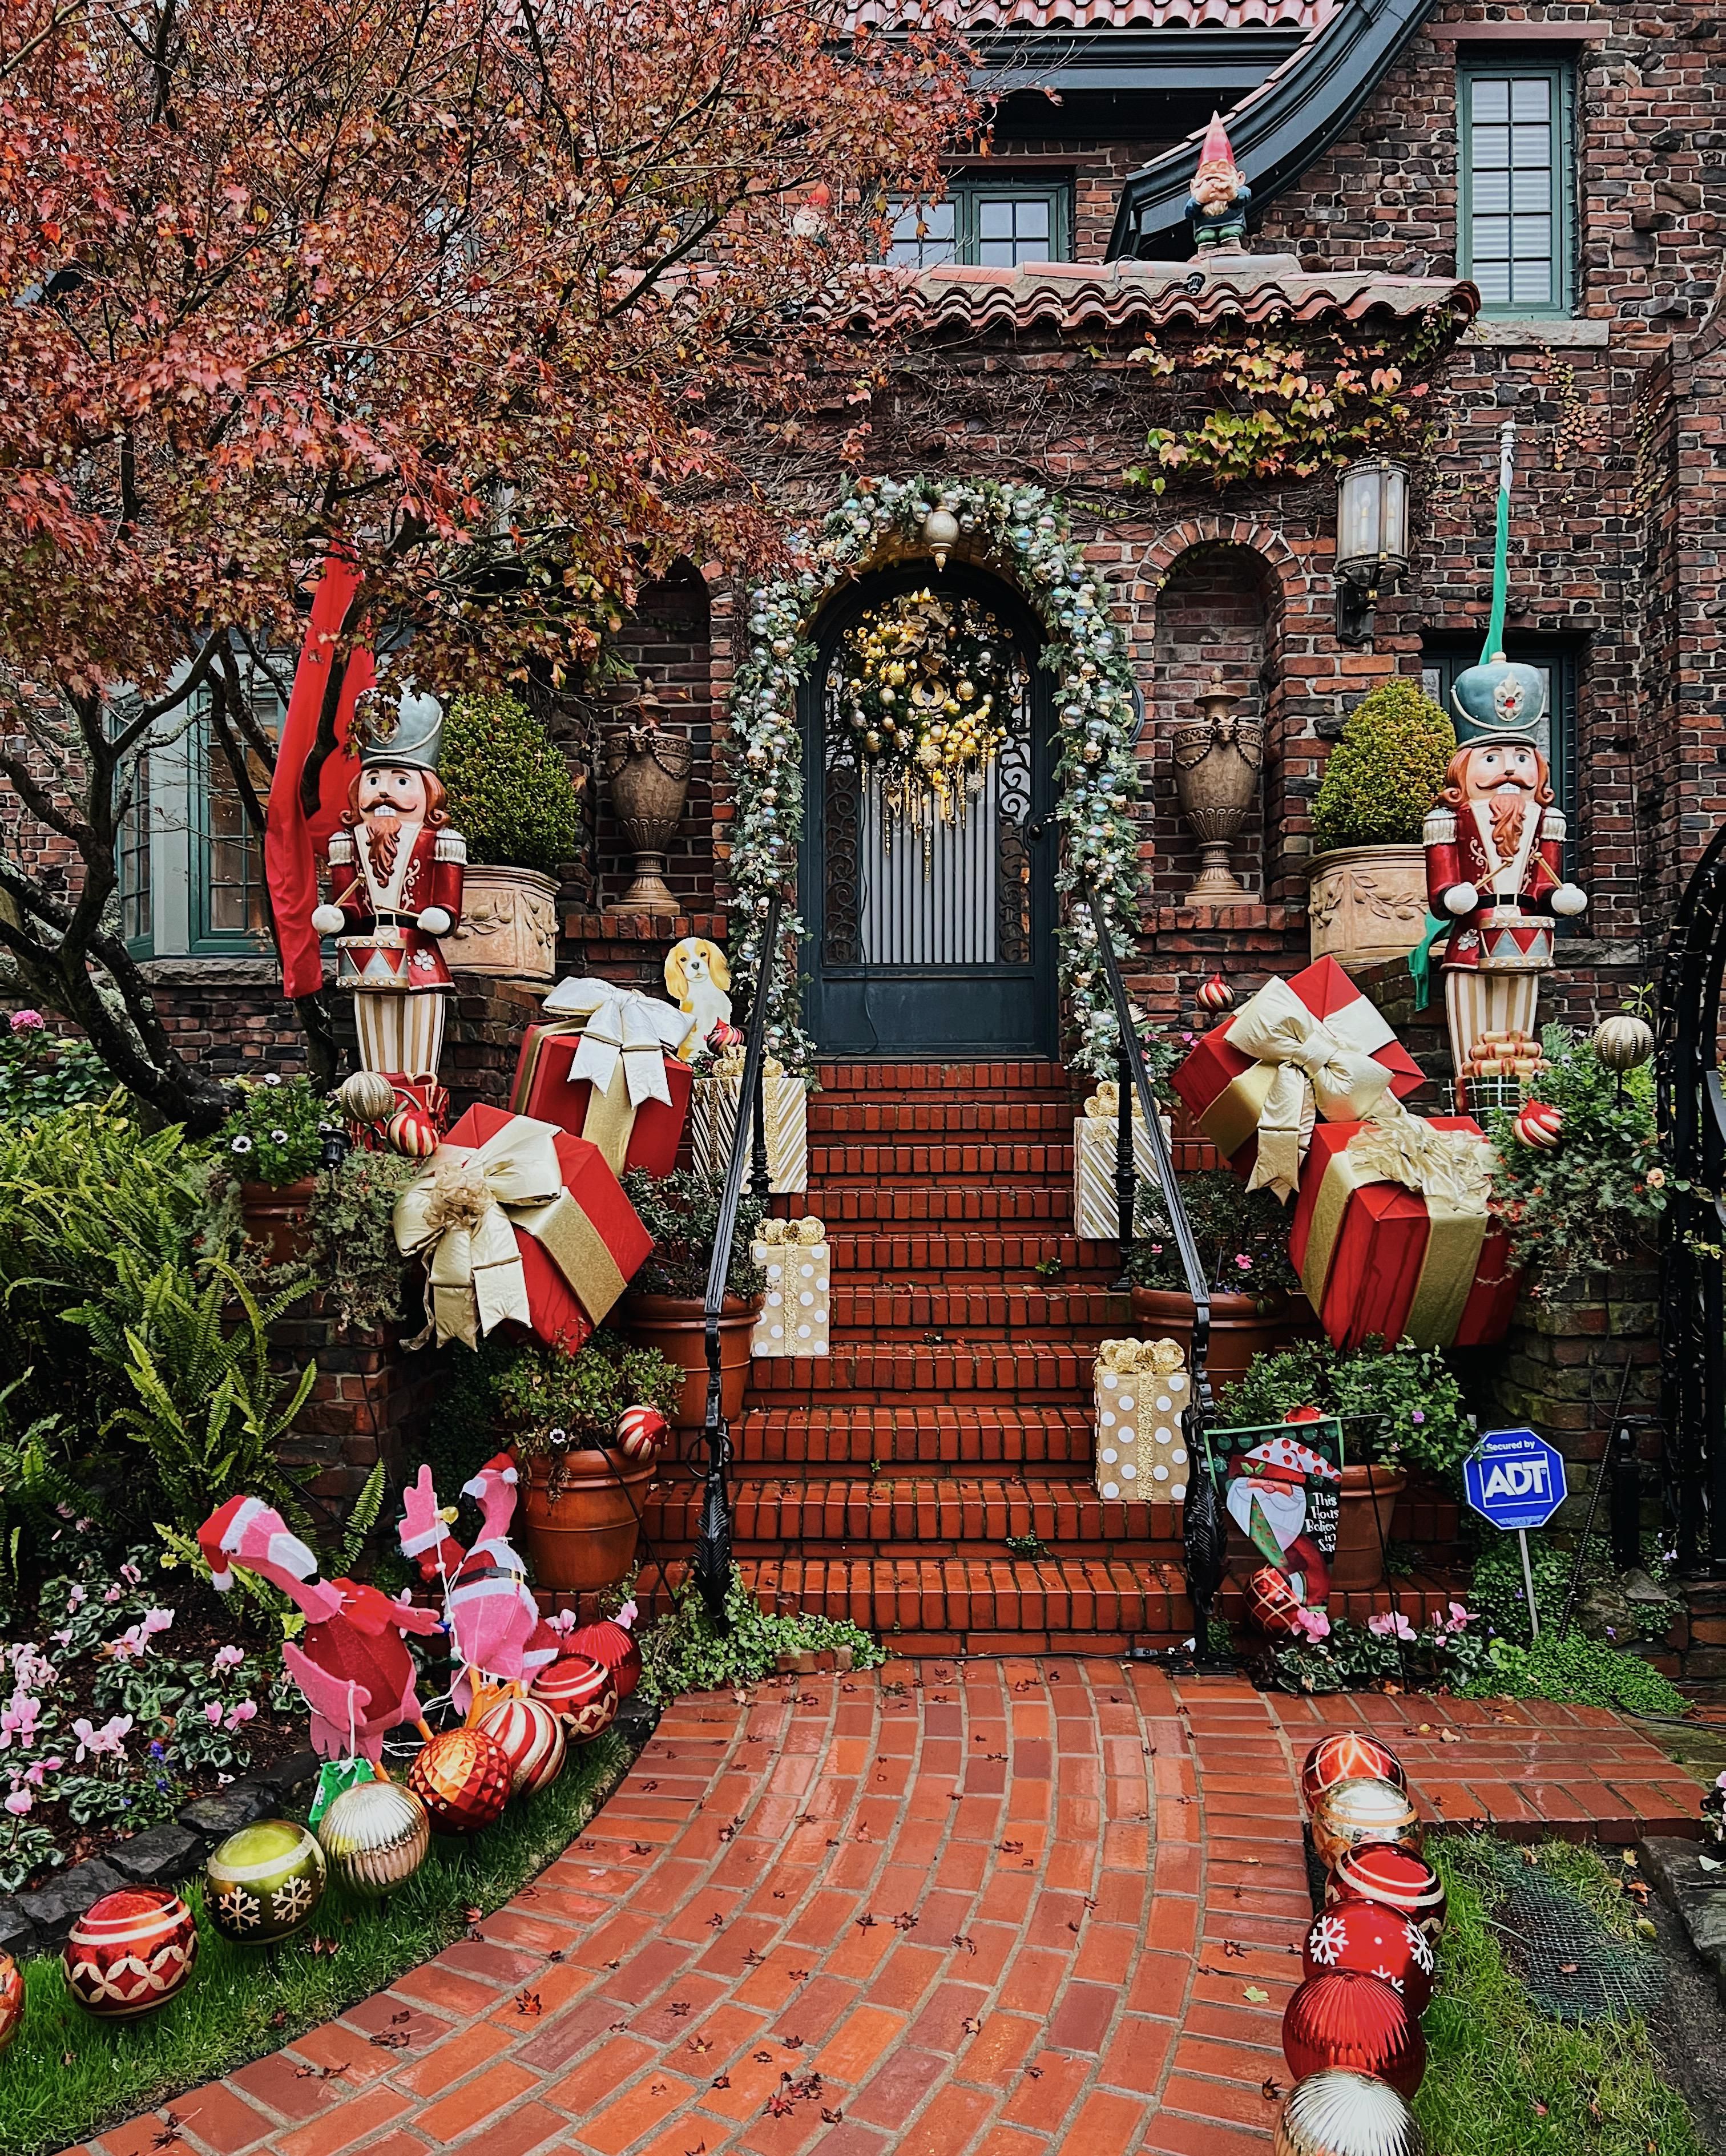 San Francisco's Jolliest Holiday Decor—and How to Capture Insta-Worthy Pics